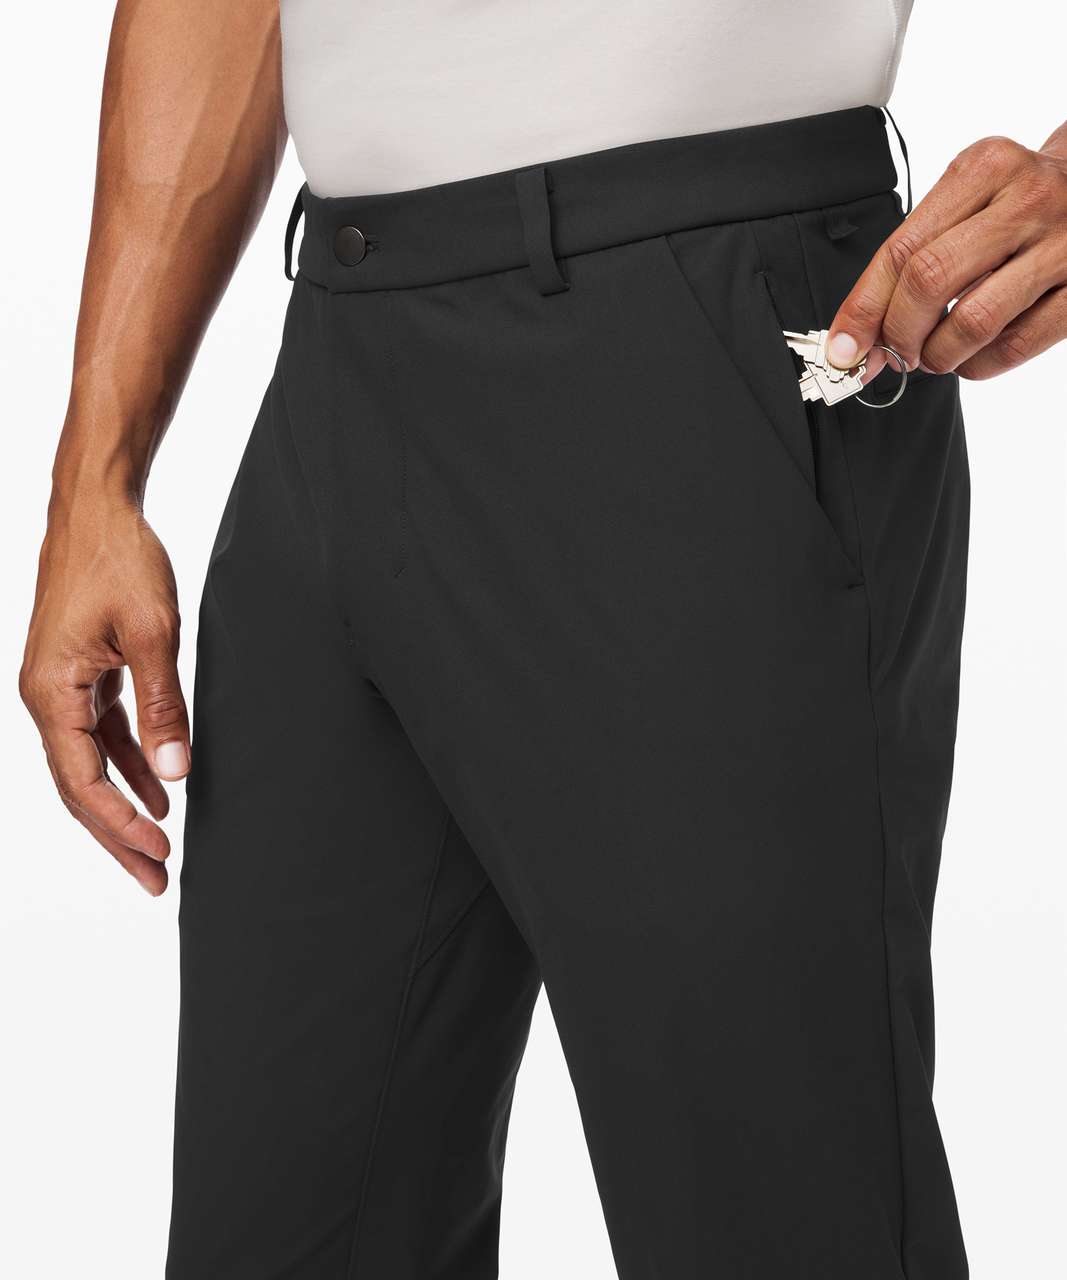 Lululemon Commission Pant Classic *Warpstreme 28" - Obsidian (First Release)